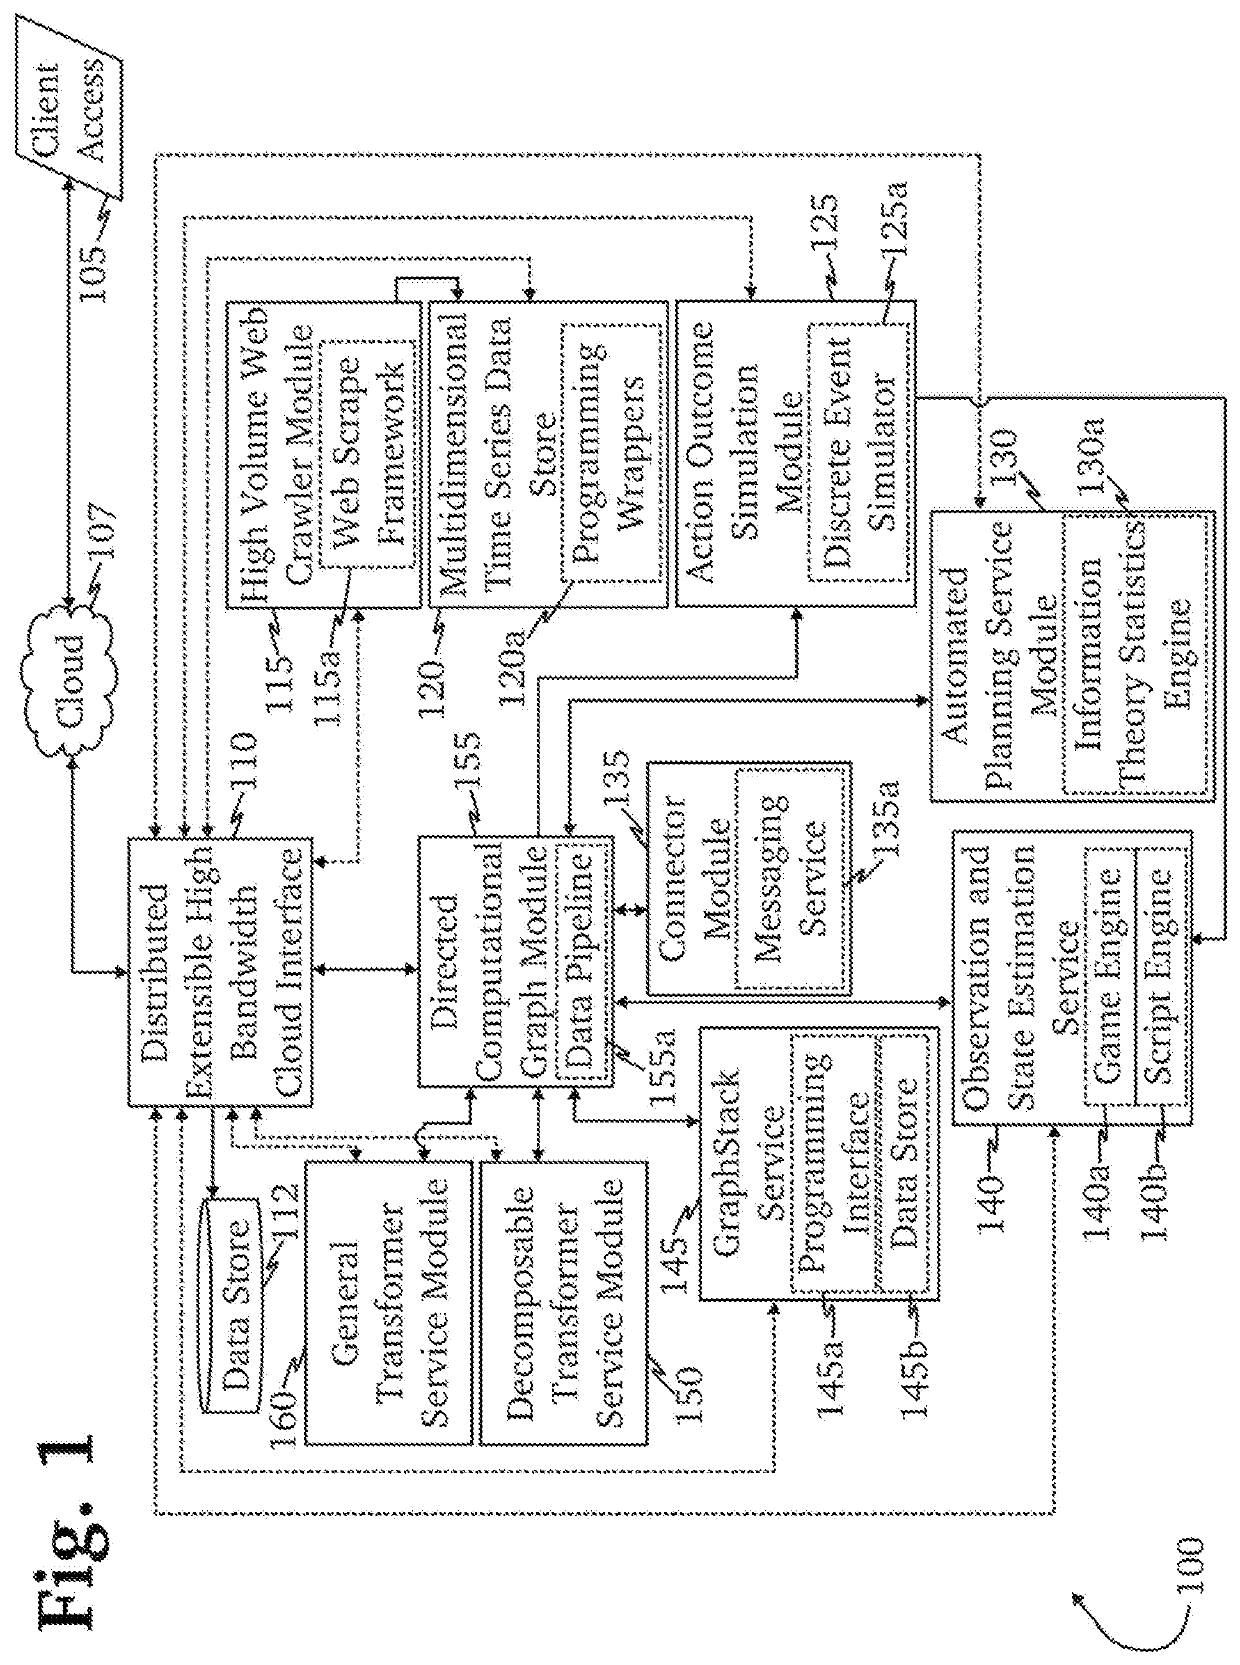 System and methods for creation and use of meta-models in simulated environments